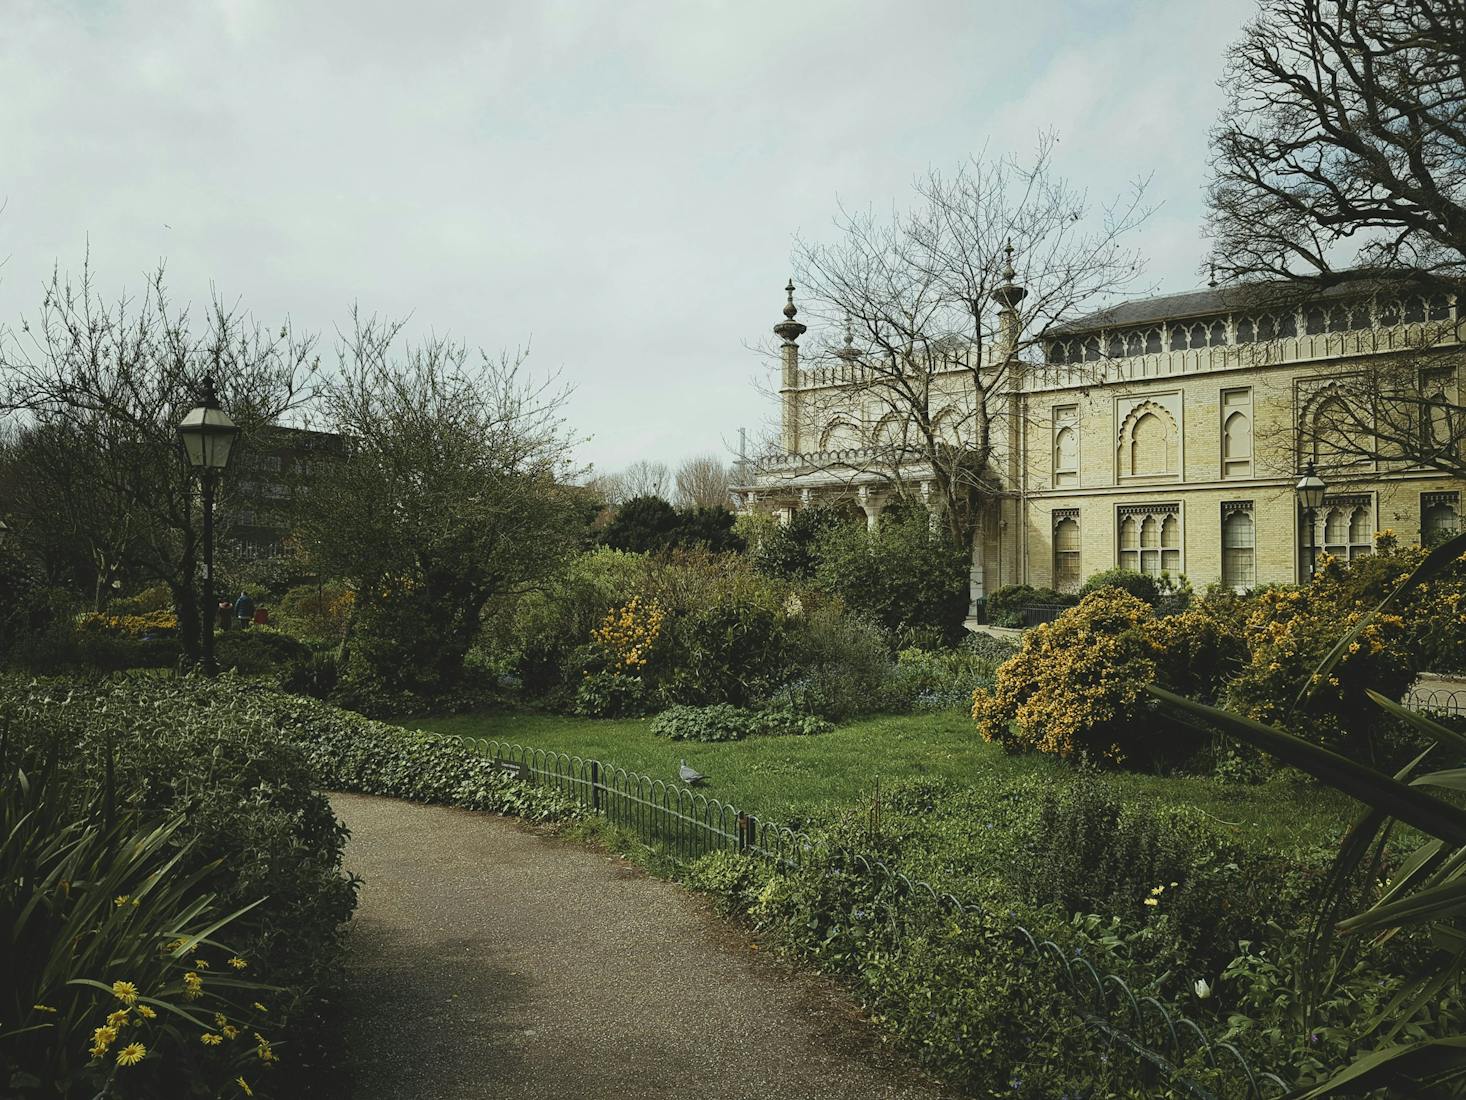 A walking path beside large shrubs and a large stately building